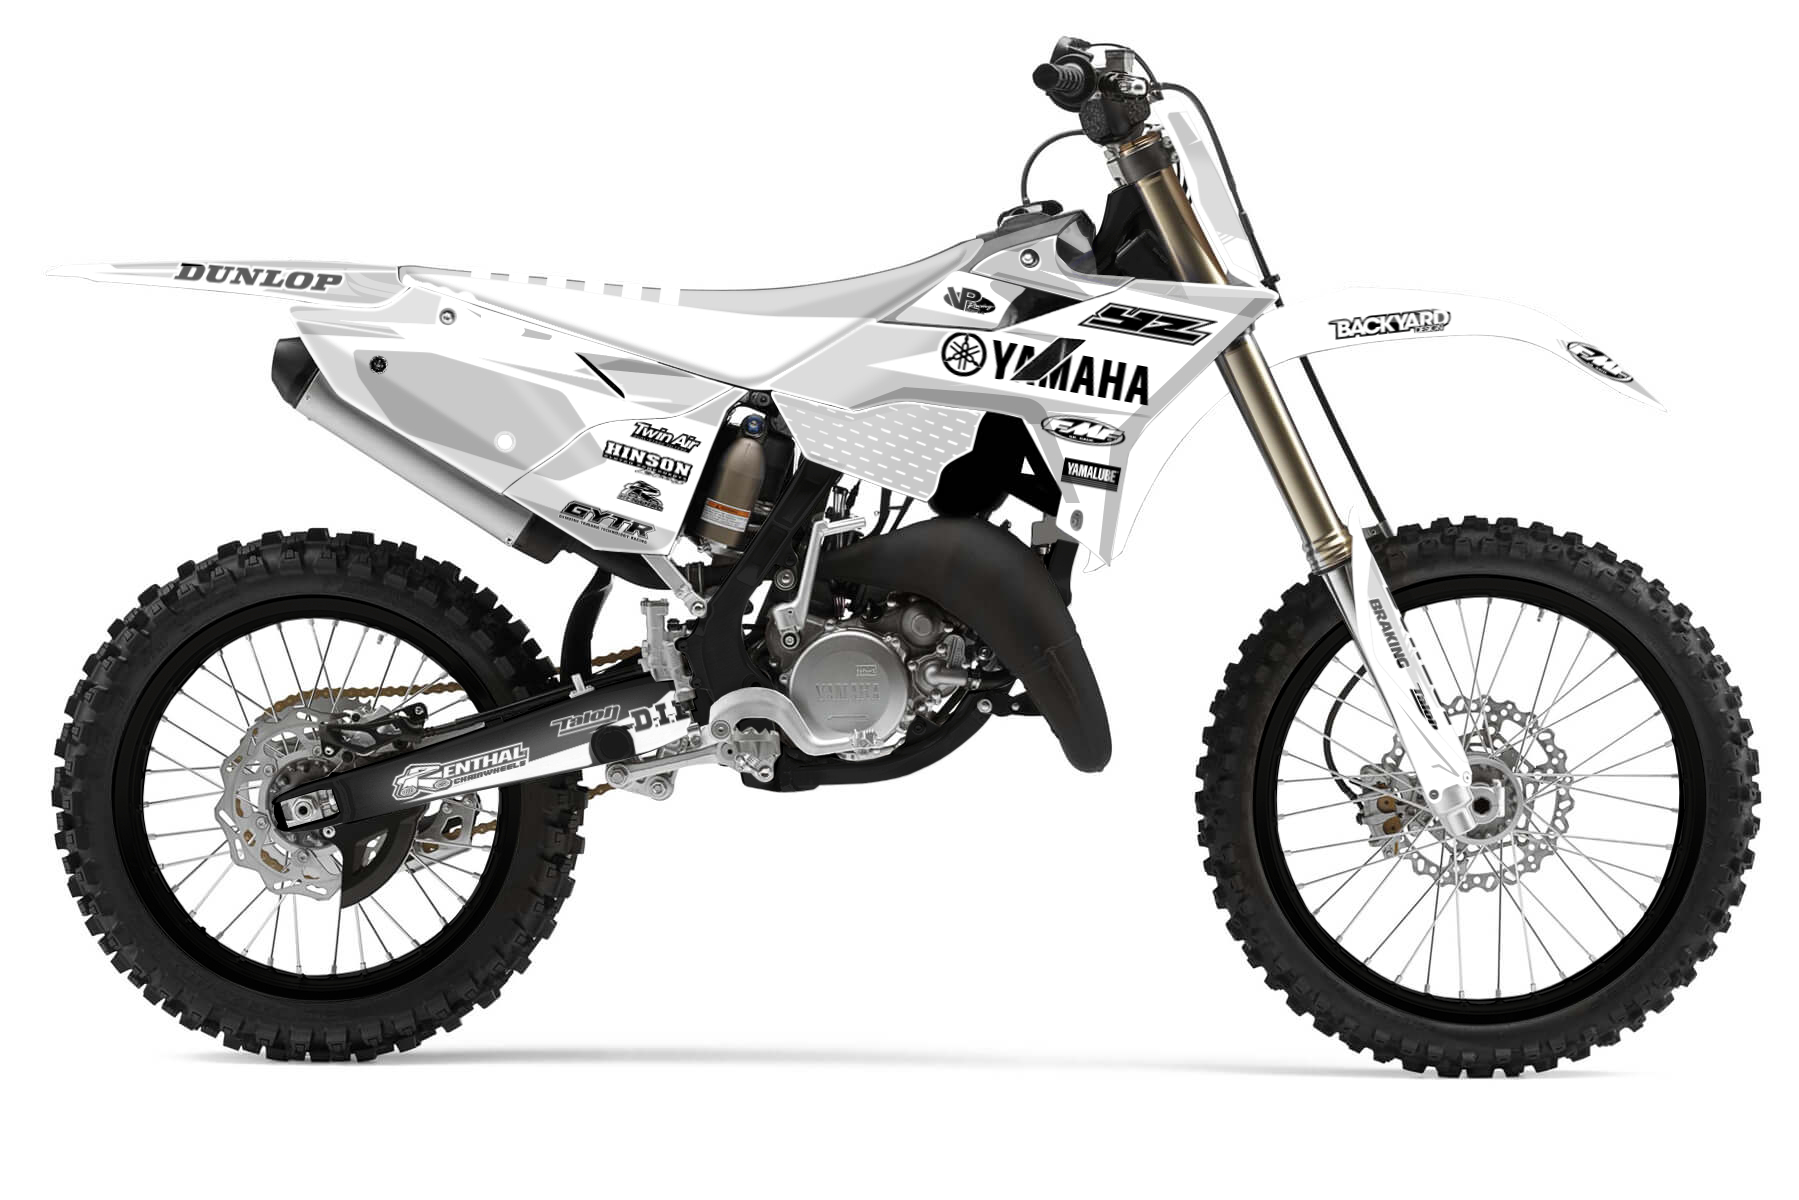 
Yamaha YZ 125 – Racetech Revolution
MX Graphic Kits

The Racetech Revolution plastic kit makes your Yamaha YZ 125 look even more aggressive and competitive. You got to love the style that matches perfectly with the bodywork of the bike